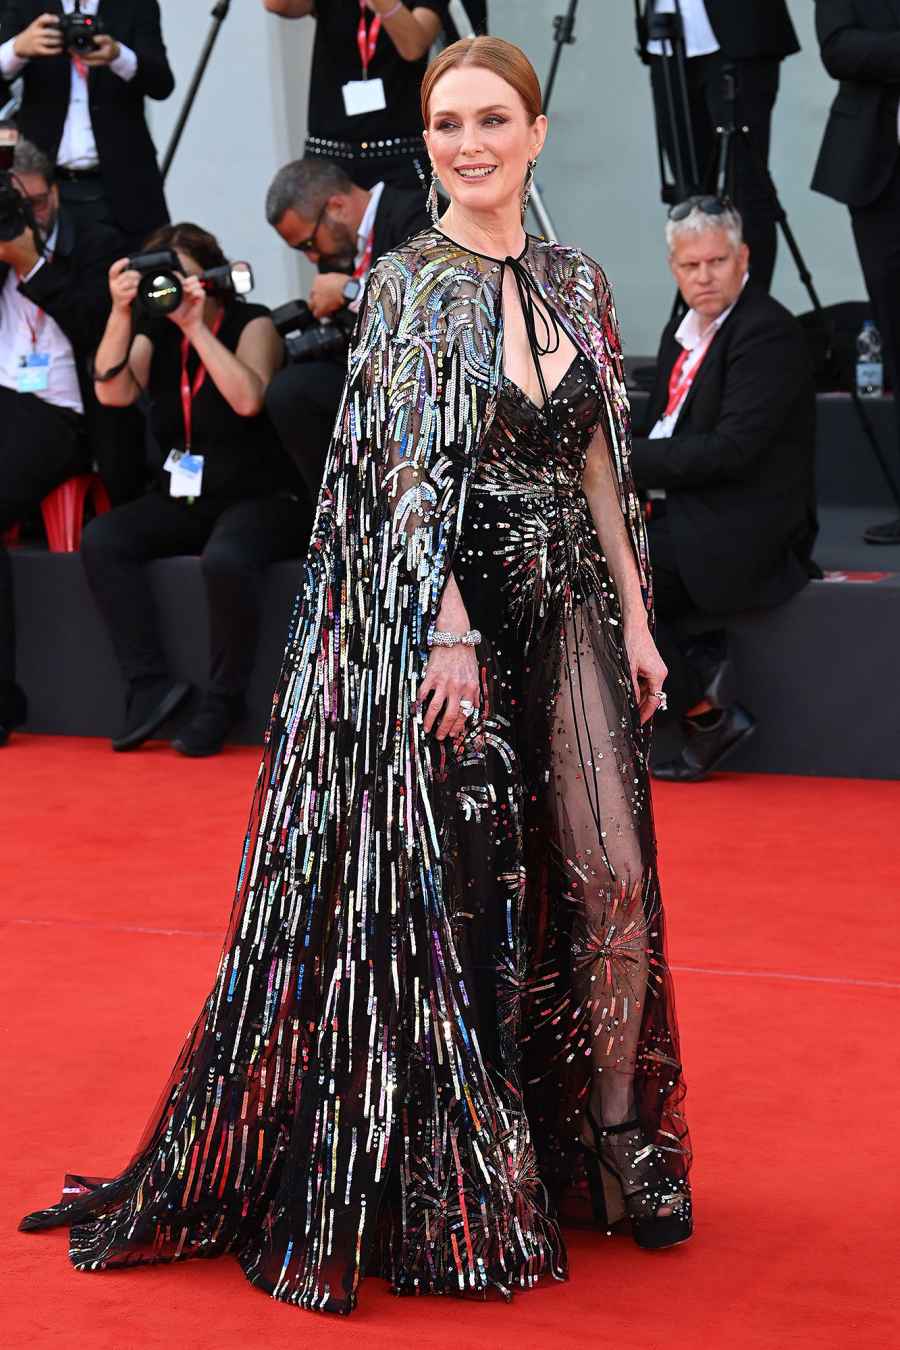 Julianne Moore Stuns in Bedazzled Naked Dress